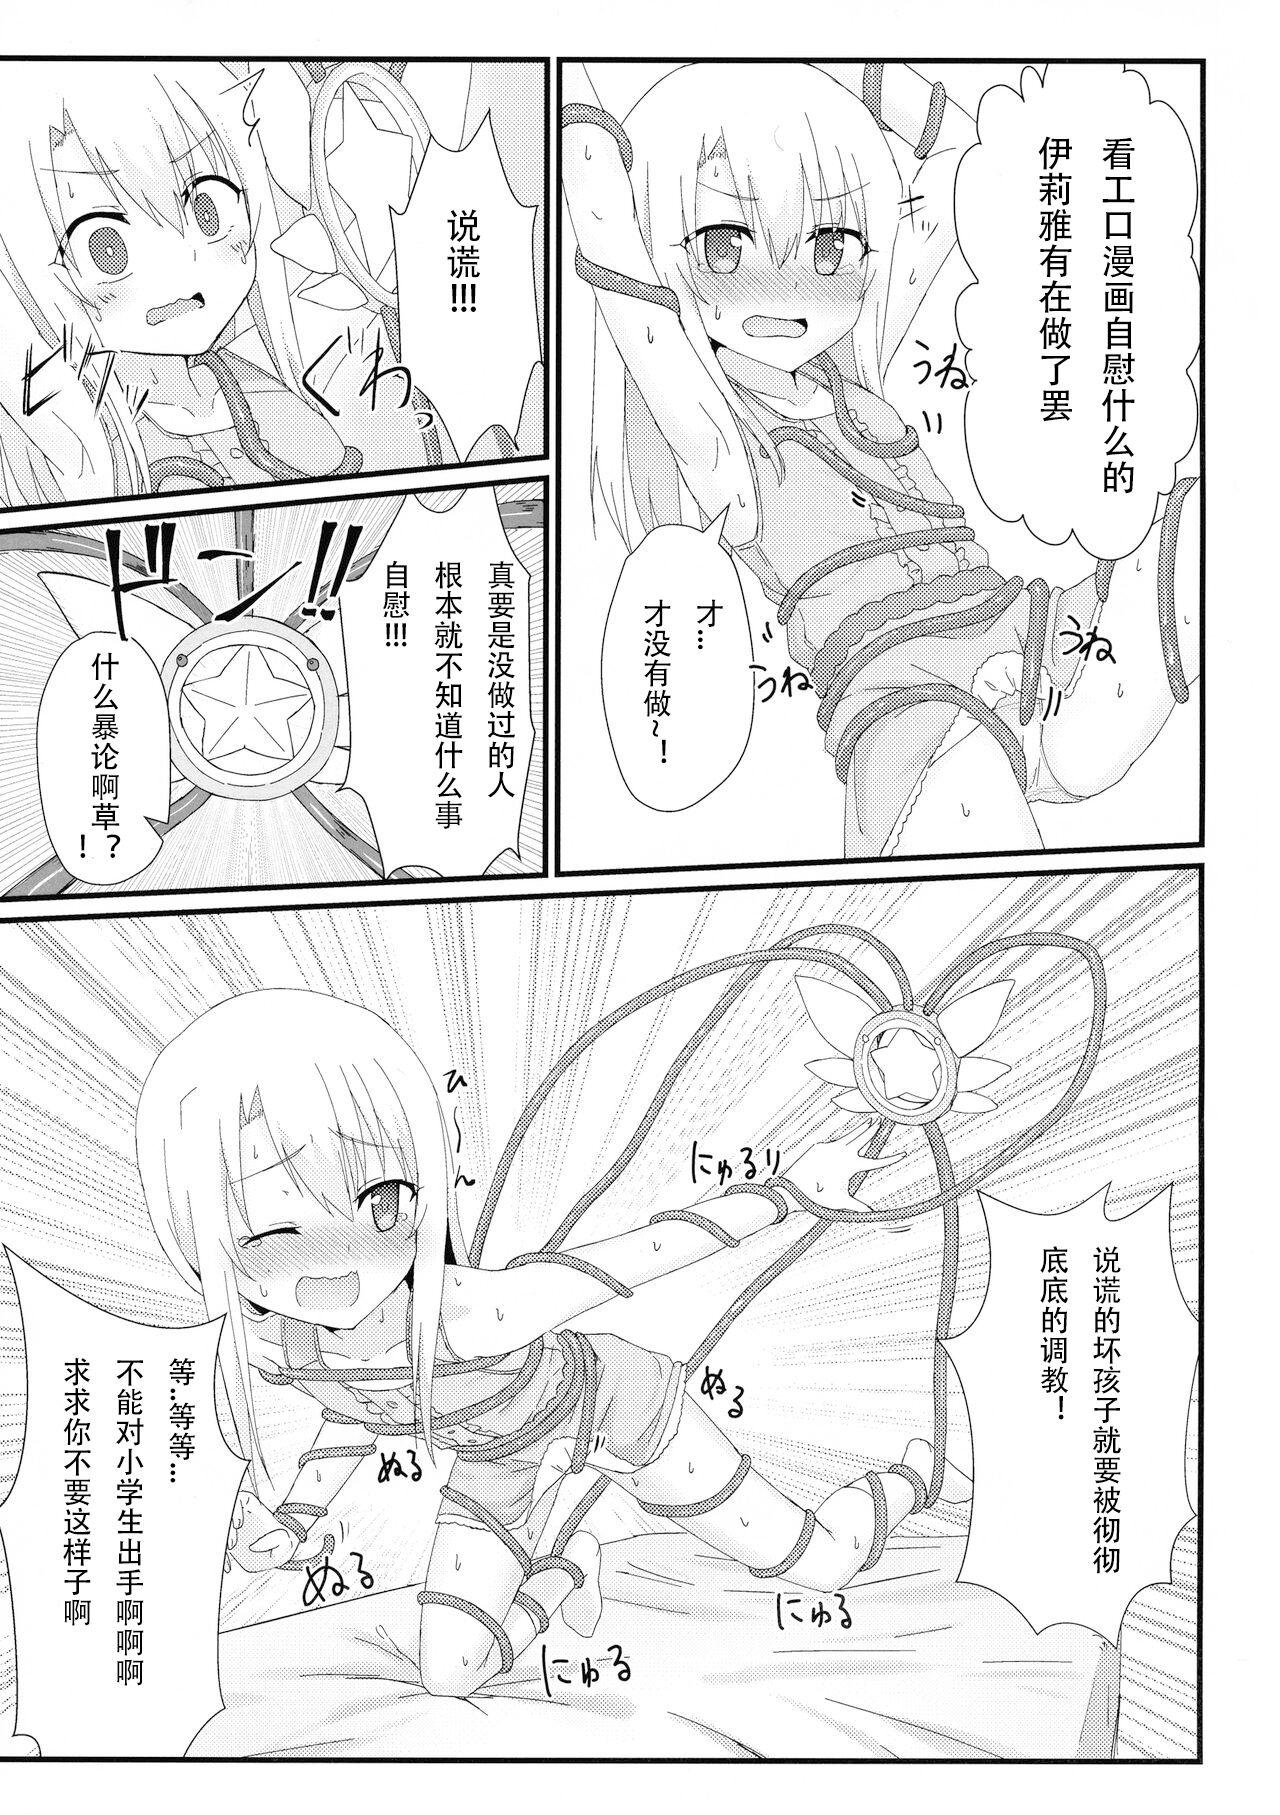 Pete Illya to Ruby Etchi Etchi Secret Function - Fate kaleid liner prisma illya Pain - Page 5